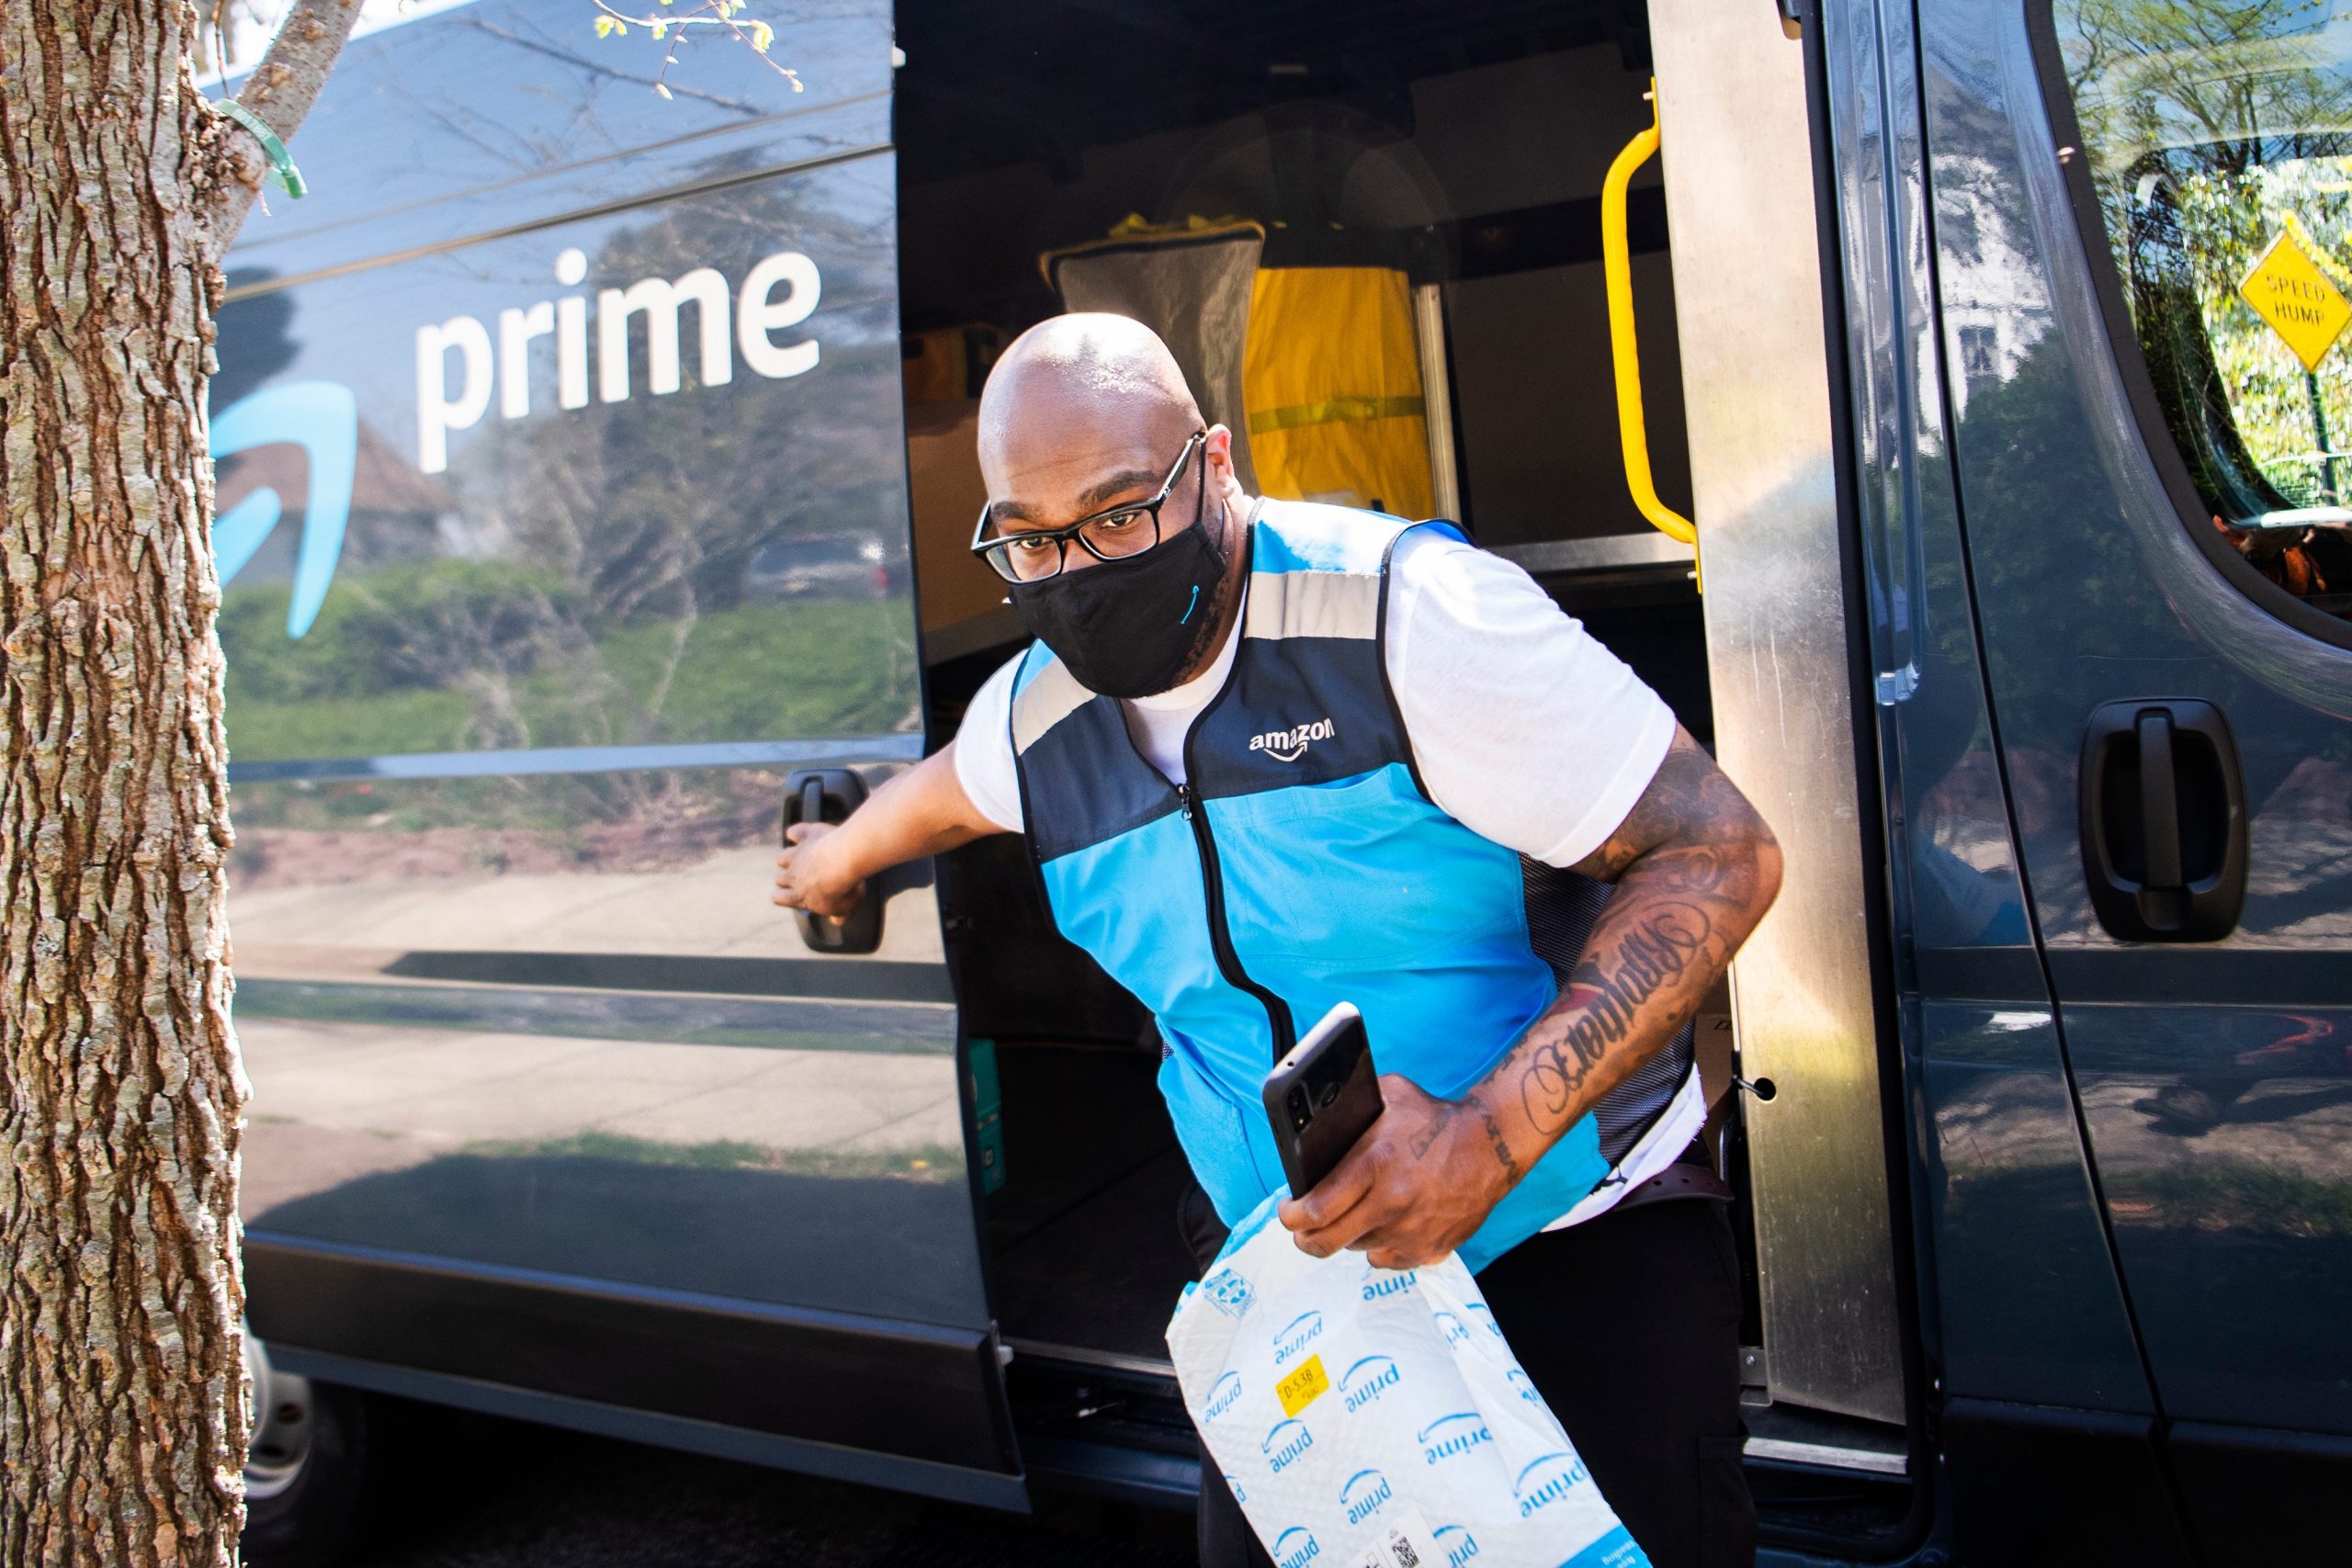 GettyImages 1232149494 UNITED STATES - APRIL 6: Amazon driver Shawndu Stackhouse delivers packages in Northeast Washington, D.C., on Tuesday, April 6, 2021. (Photo By Tom Williams/CQ-Roll Call, Inc via Getty Images)